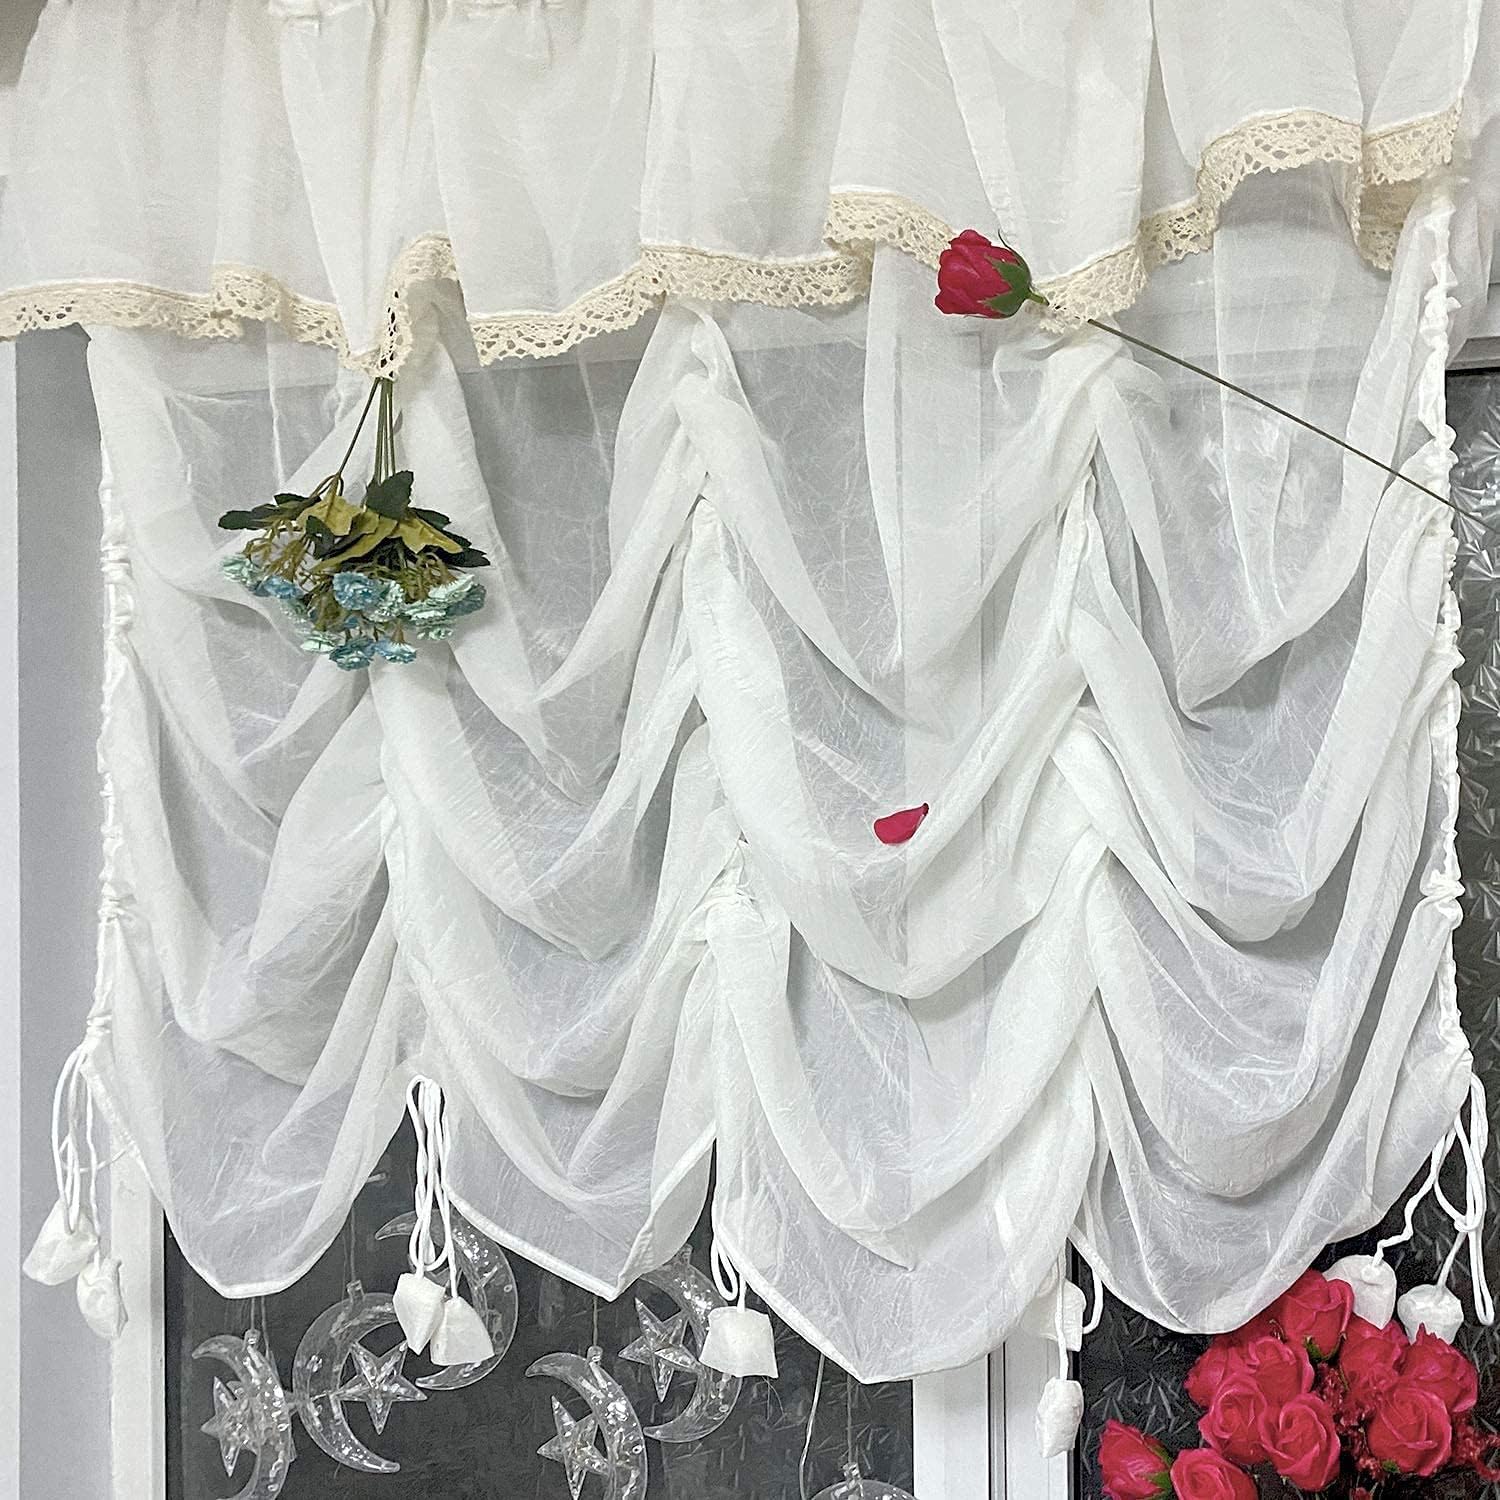 FADFAY Sheer Curtain 78x59 Attached Valance Farmhouse White Lace Balloon Curtain Adjustable Tie-Up Curtain Shades, 1 Panel Door Curtain Shabby Tulle Curtain for Window